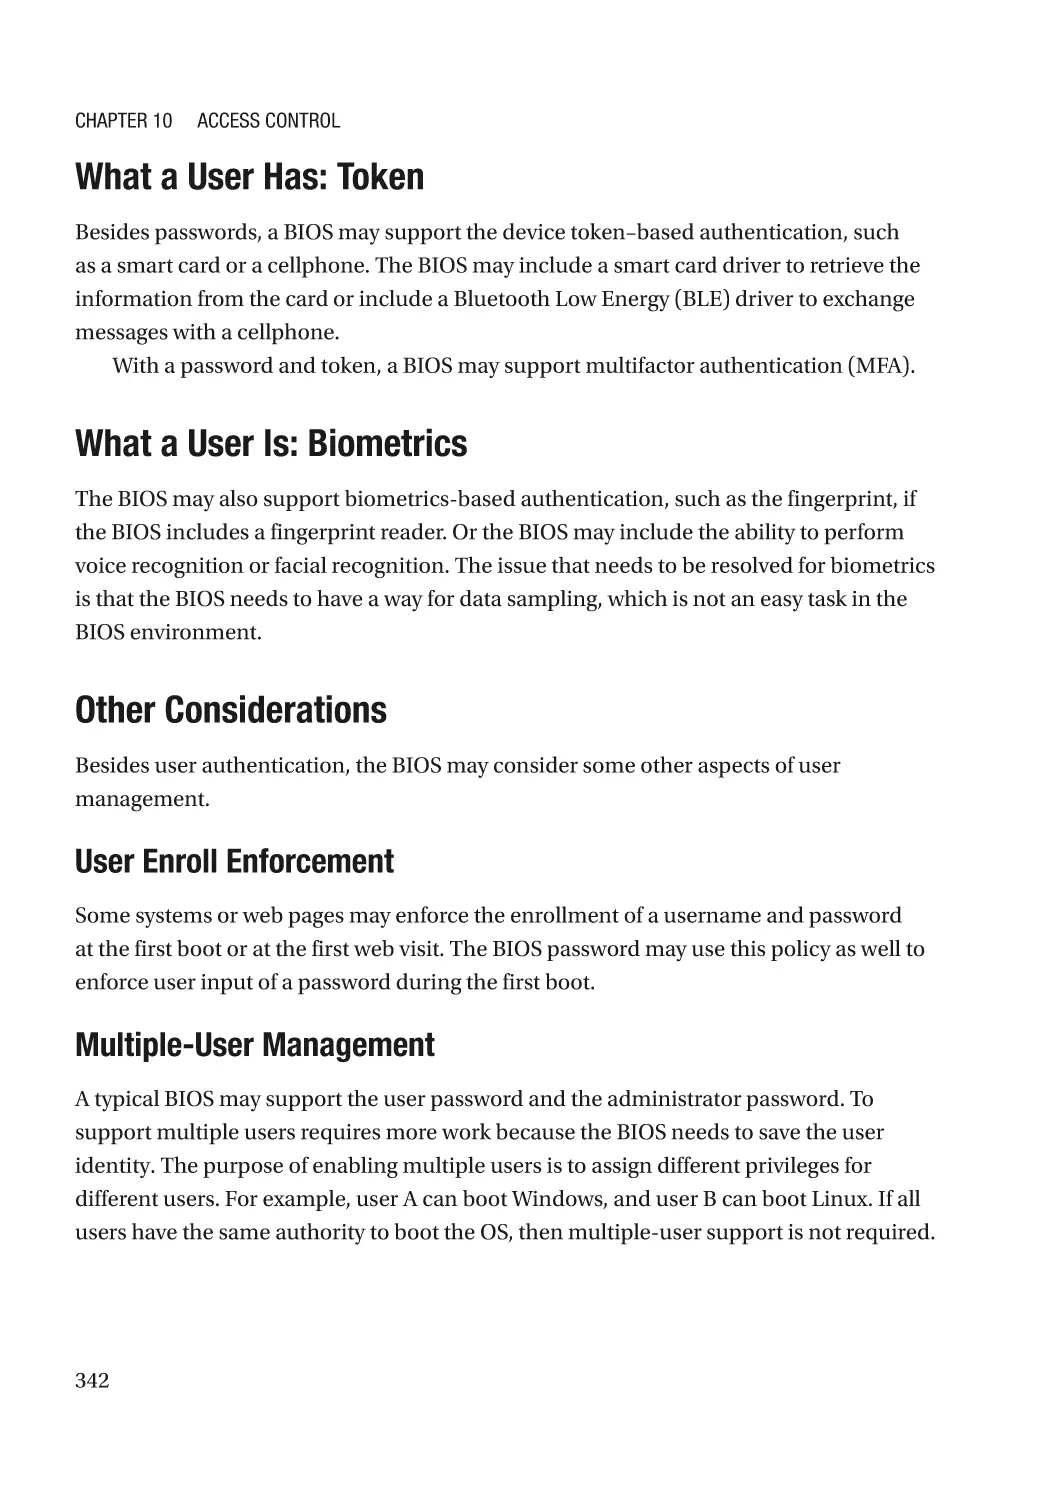 What a User Has
What a User Is
Other Considerations
User Enroll Enforcement
Multiple-User Management